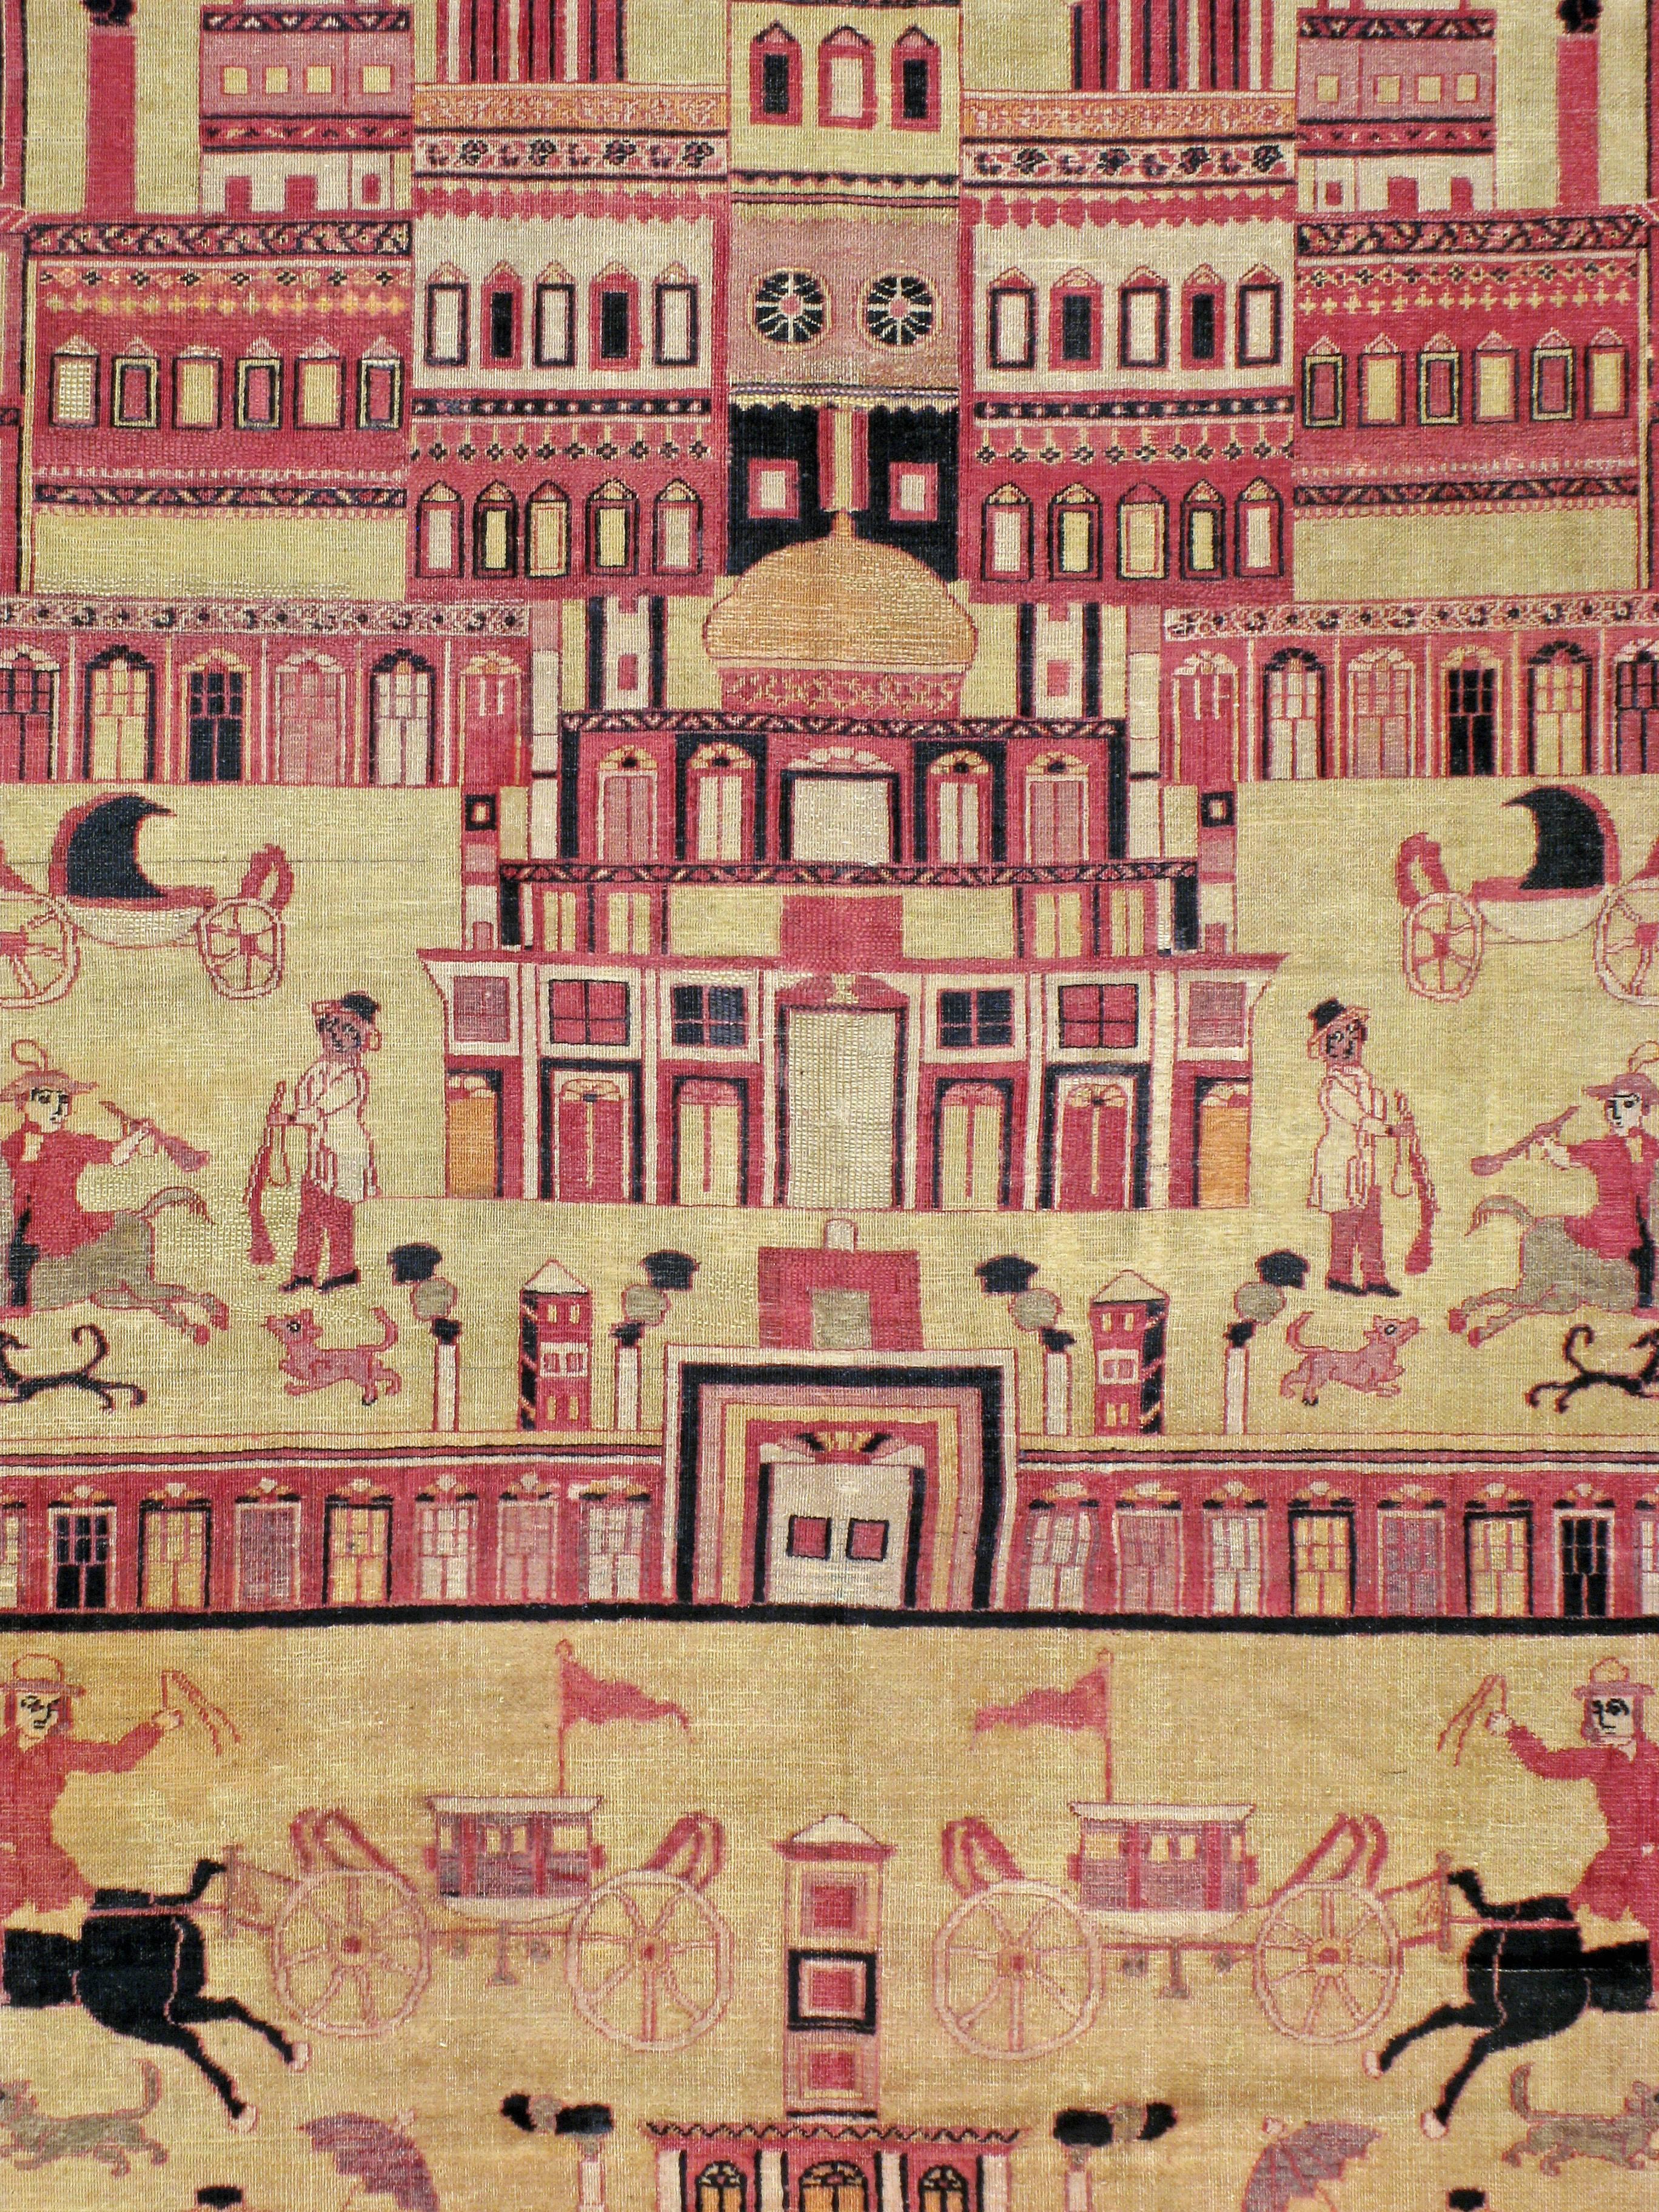 An early 20th century, Persian Khorassan Pictorial carpet.

Measures: 16' 3